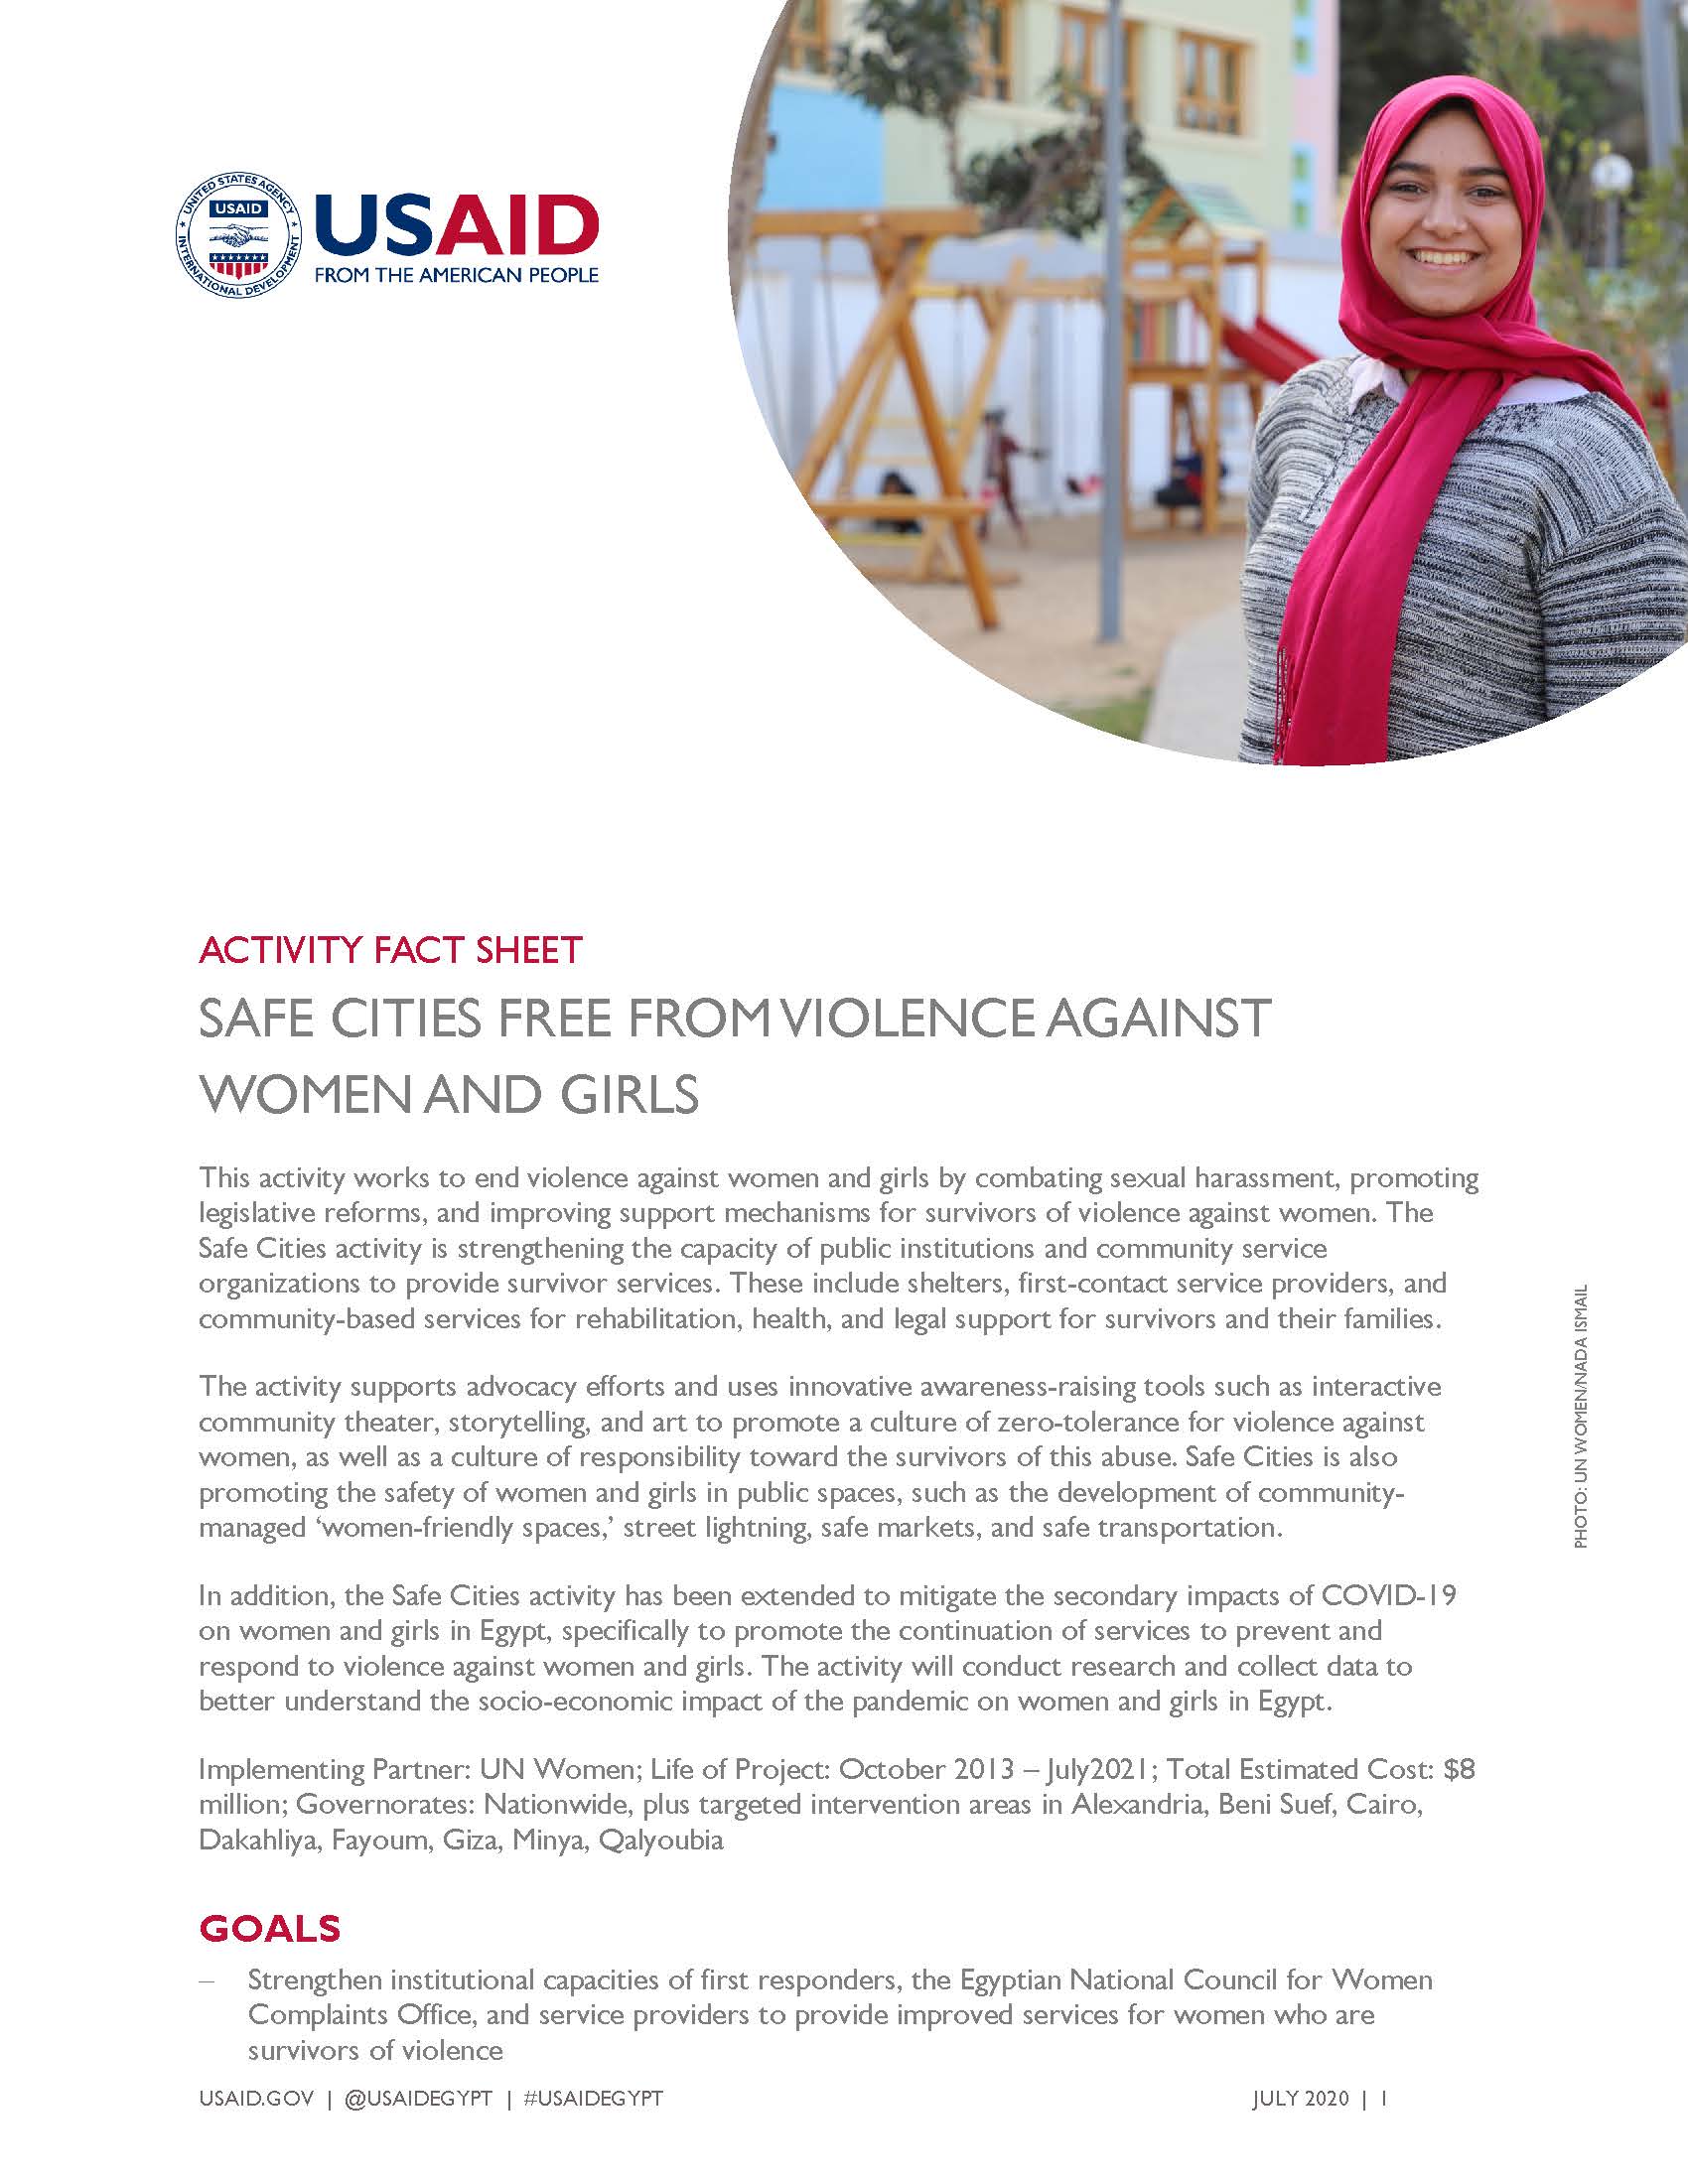 USAID/Egypt Activity Fact Sheet: Safe Cities Free From Violence Against Women